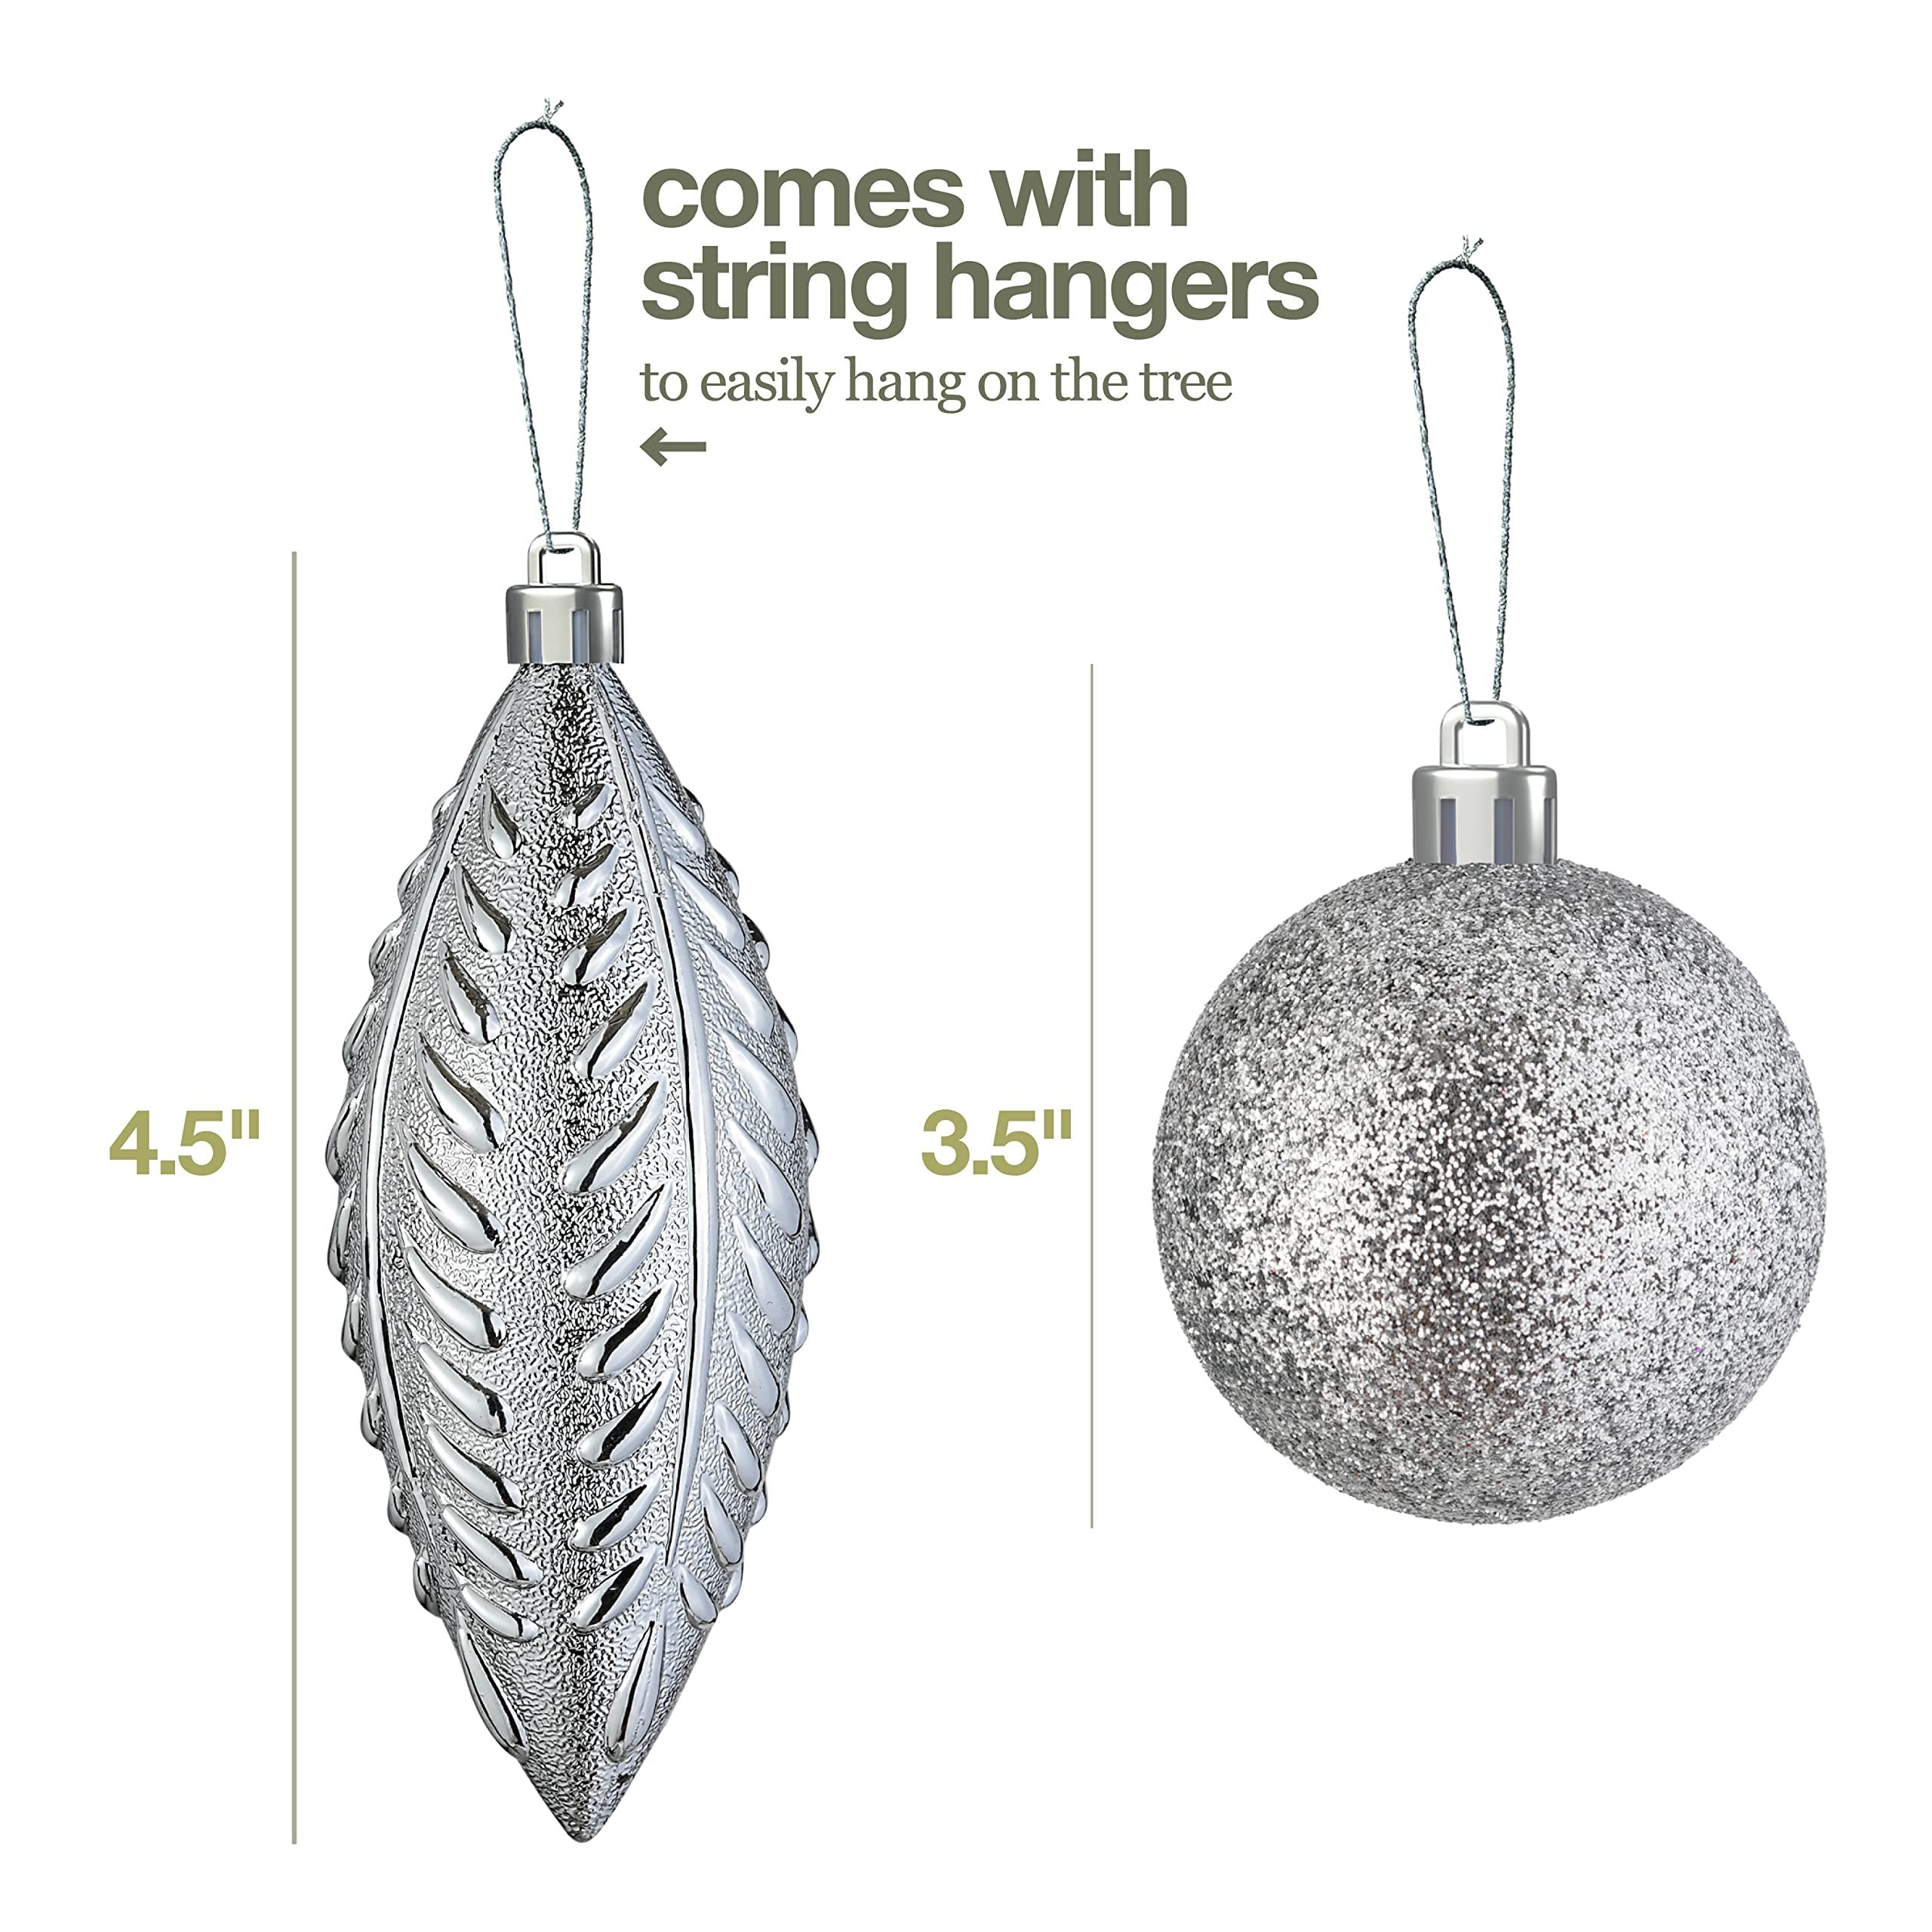 Prextex Christmas Ball Ornaments for Christmas Decorations (Silver) | 24 pcs Xmas Tree Shatterproof Ornaments with Hanging Loop for Holiday, Wreath and Party Decorations